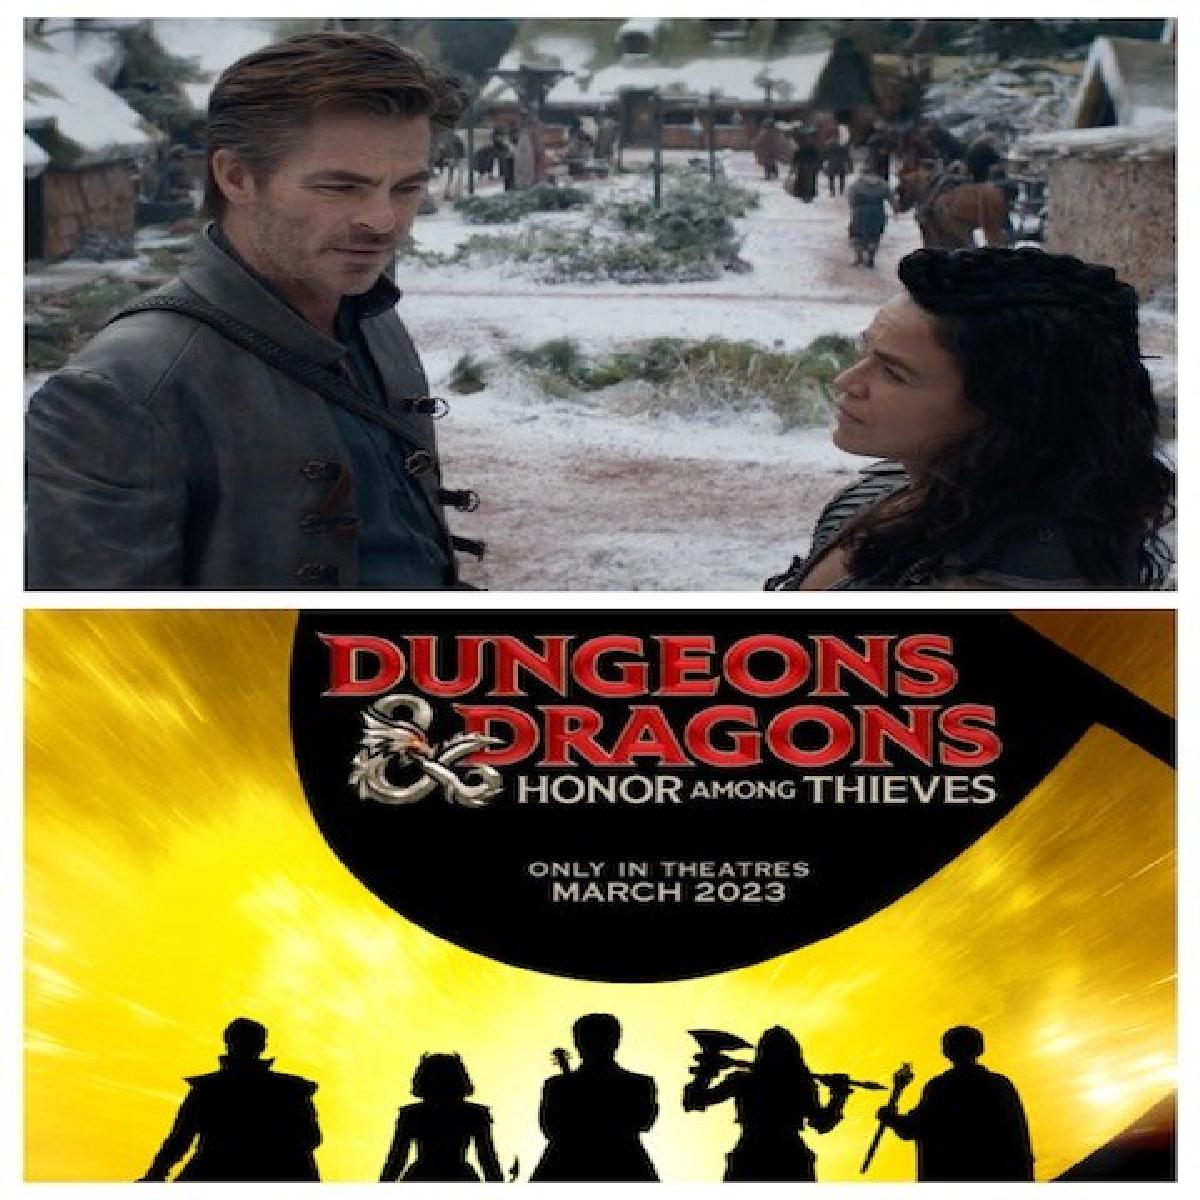 Chris Pine And Michelle Rodriguez In Dungeons And Dragons  Honor Among Thieves